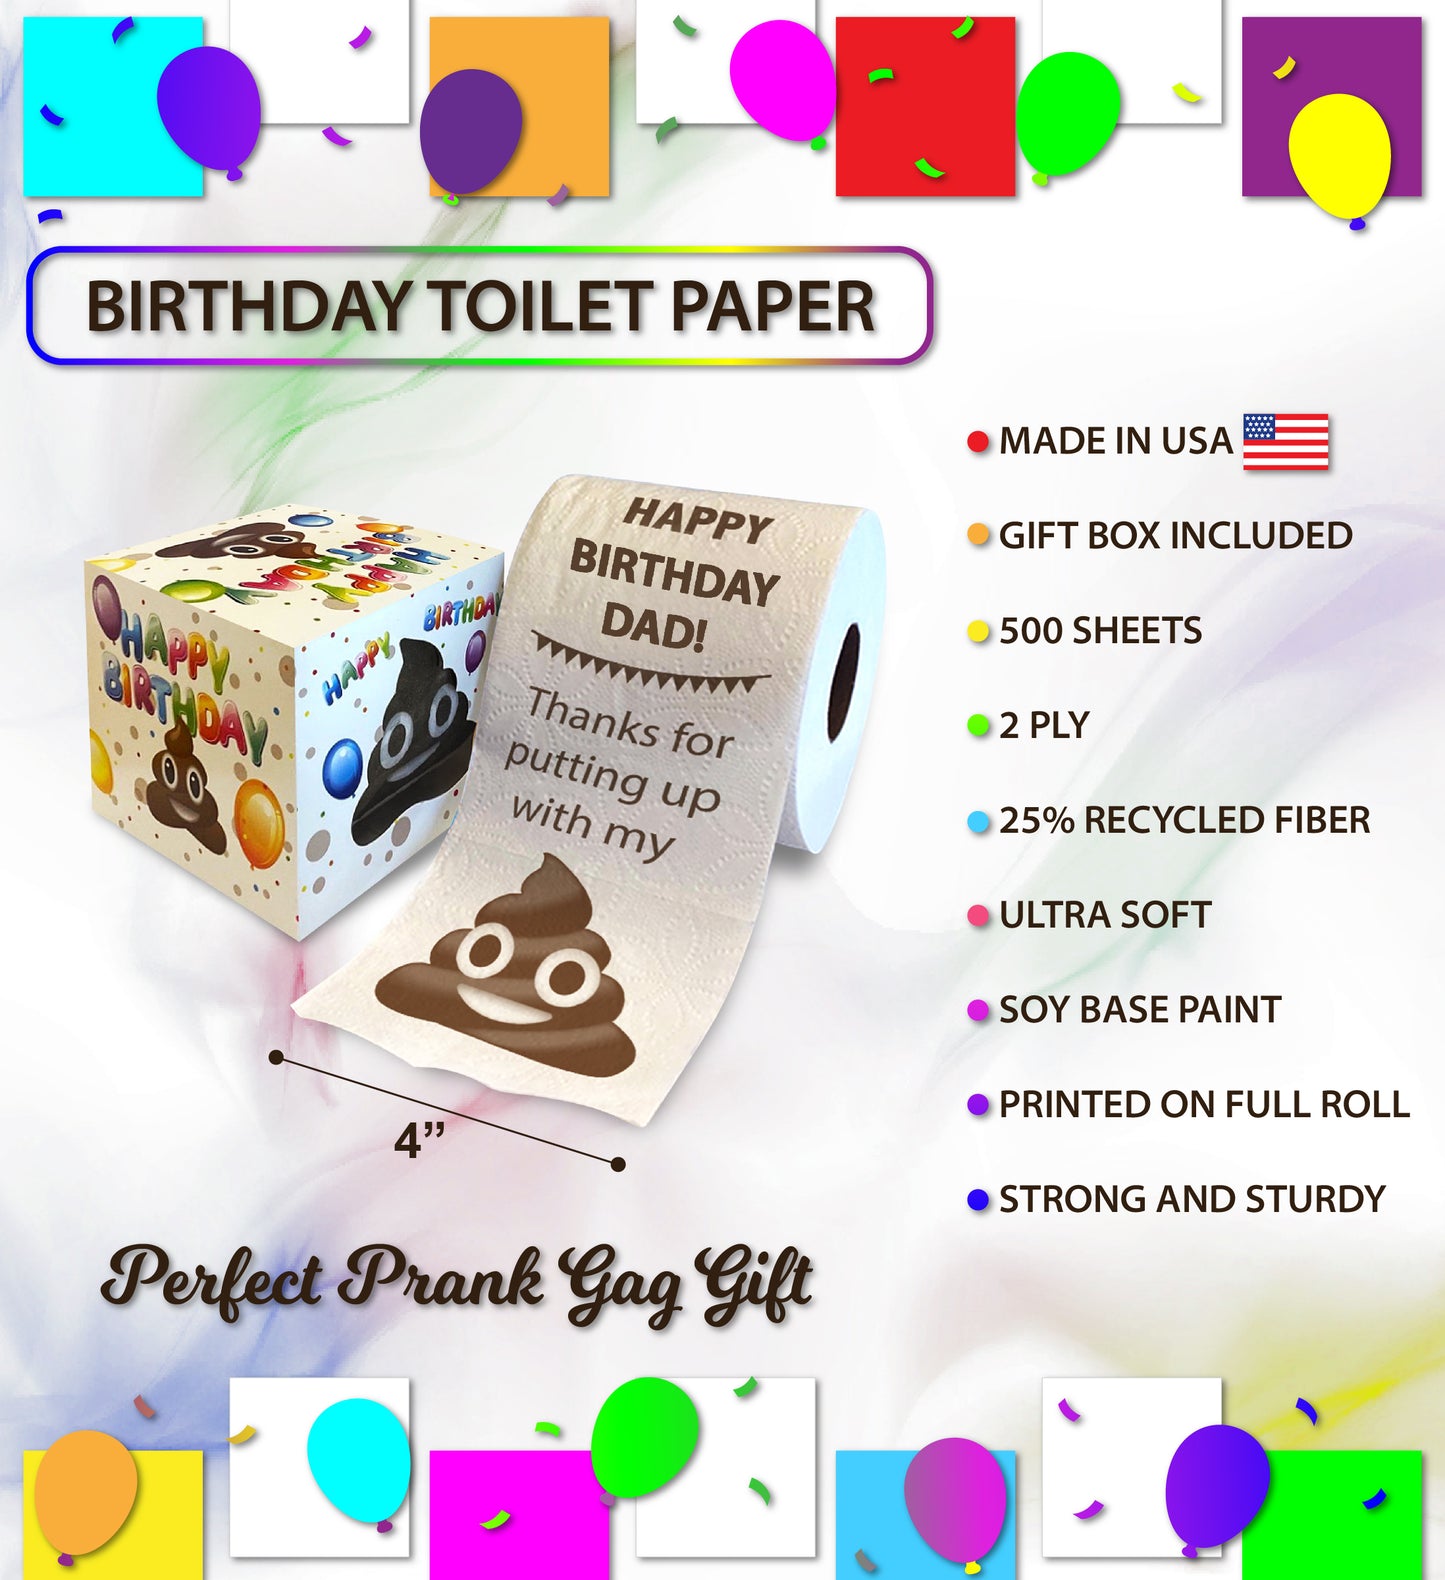 Printed TP Happy Birthday Dad Thanks for Putting Up with Poop Toilet Paper Roll